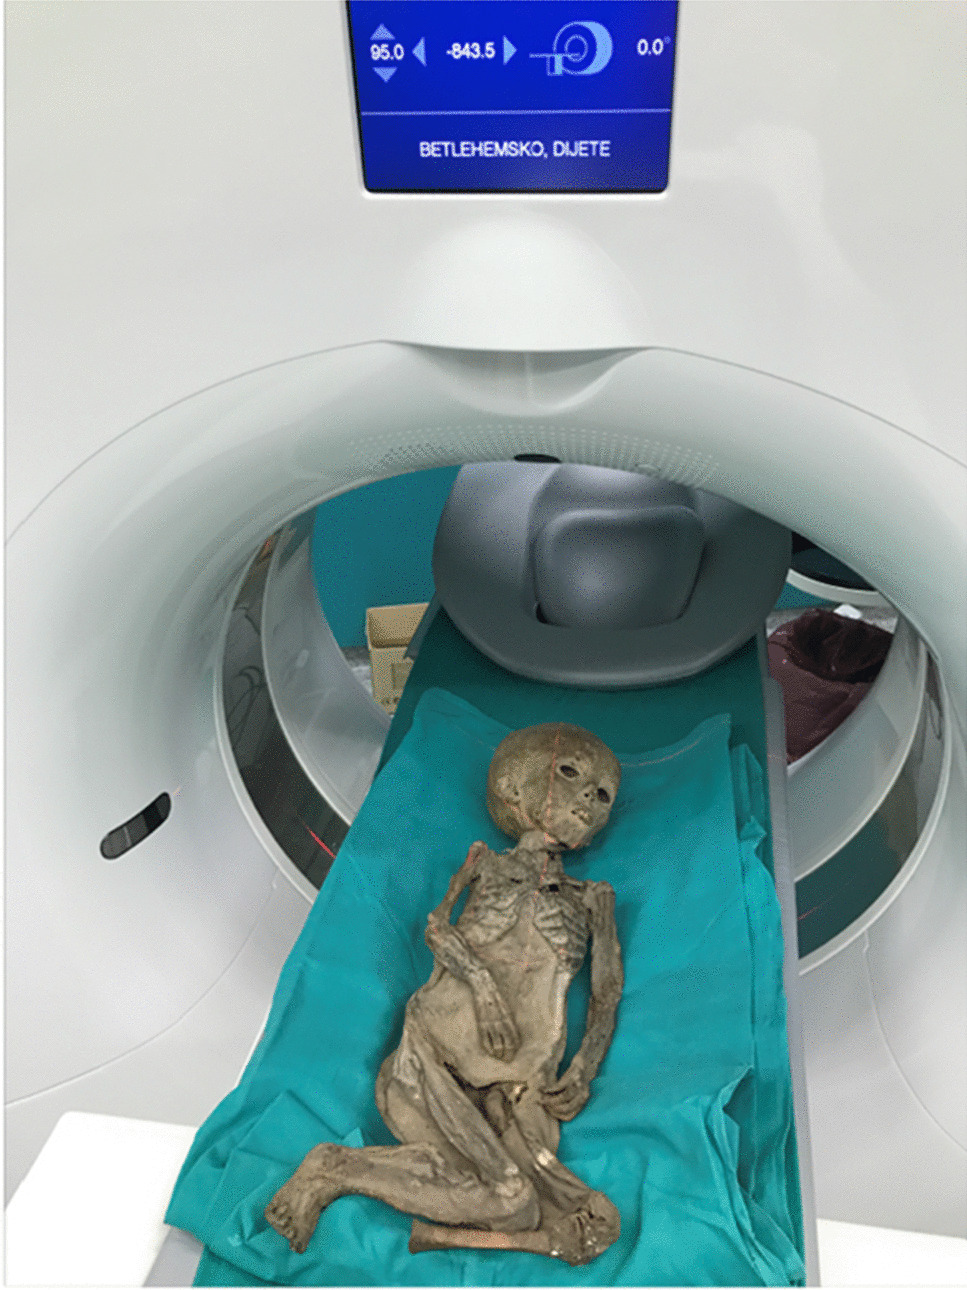 CT, MR, and isotope data of a mummified child from Zagreb Cathedral, Croatia: giving voice to the past through imaging